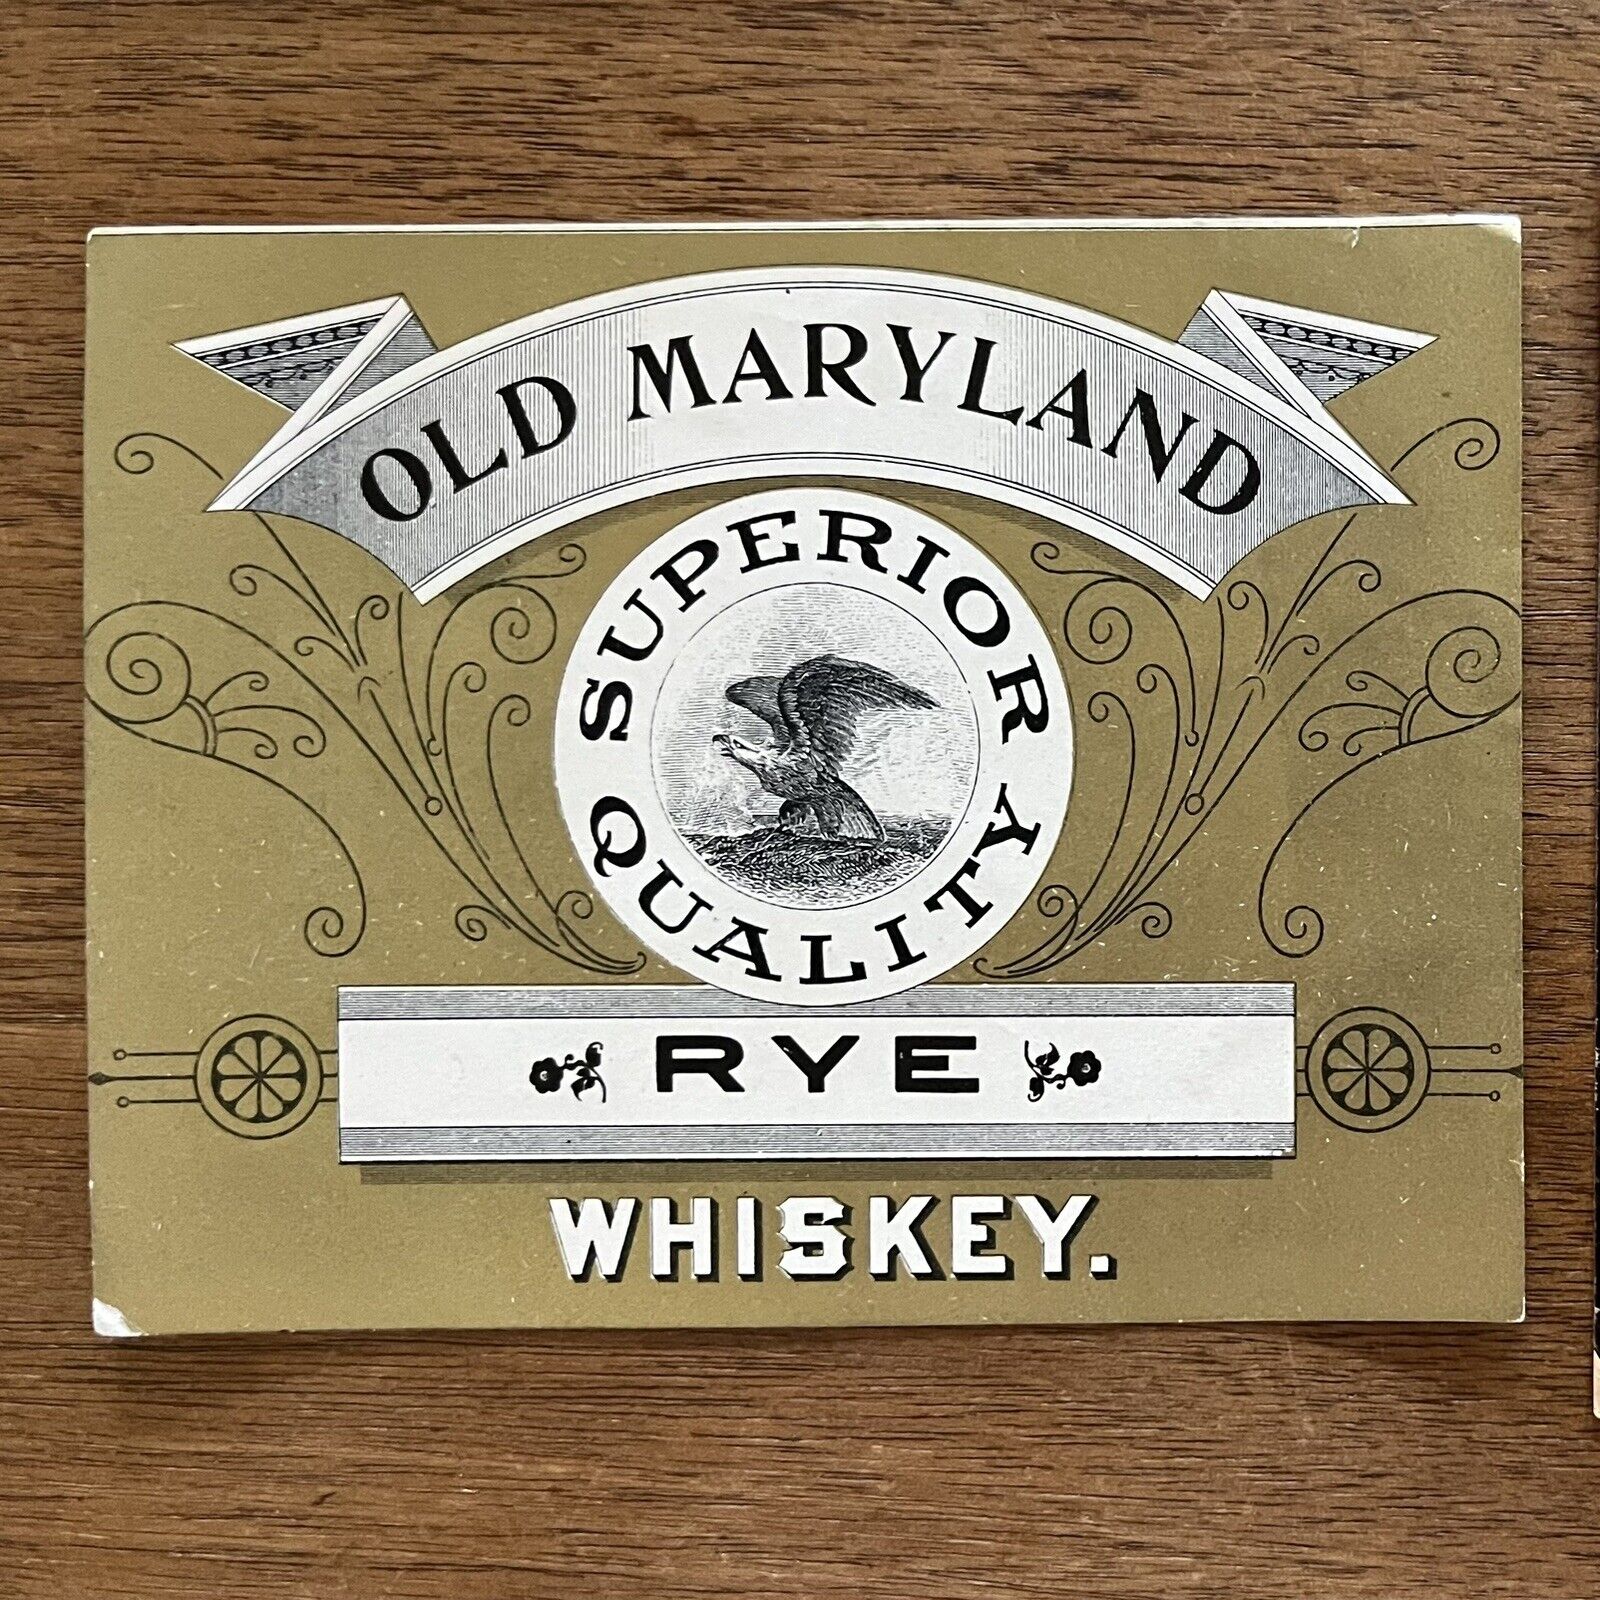 Vintage RARE Maryland Old Fashioned Superior Quality Rye Whiskey Paper Label